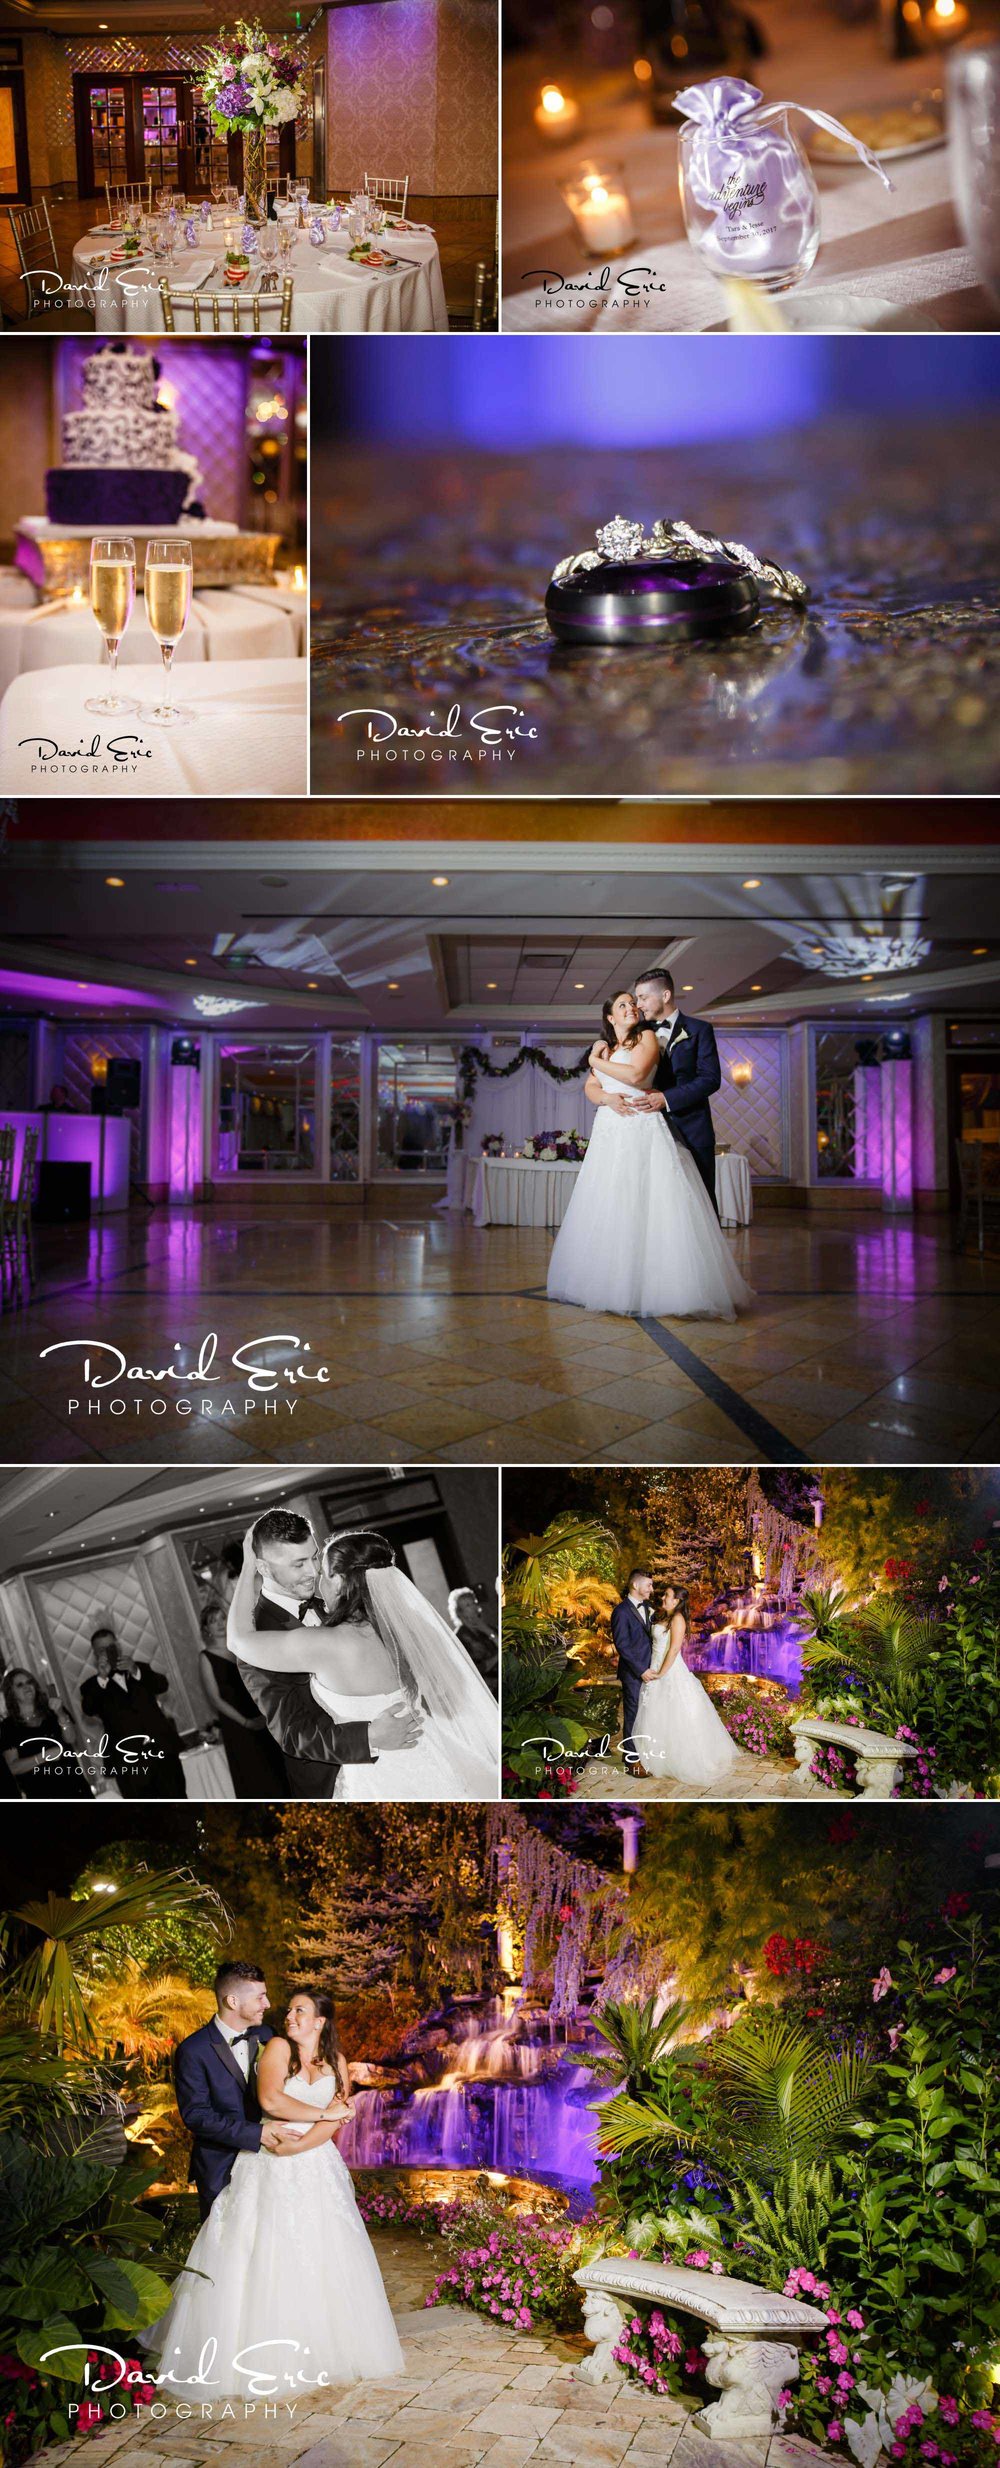  Reception at  Seasons Catering located at 644 Pascack Rd, Township of Washington, NJ 07676 featuring the first dance nighttime photo in the gardens 